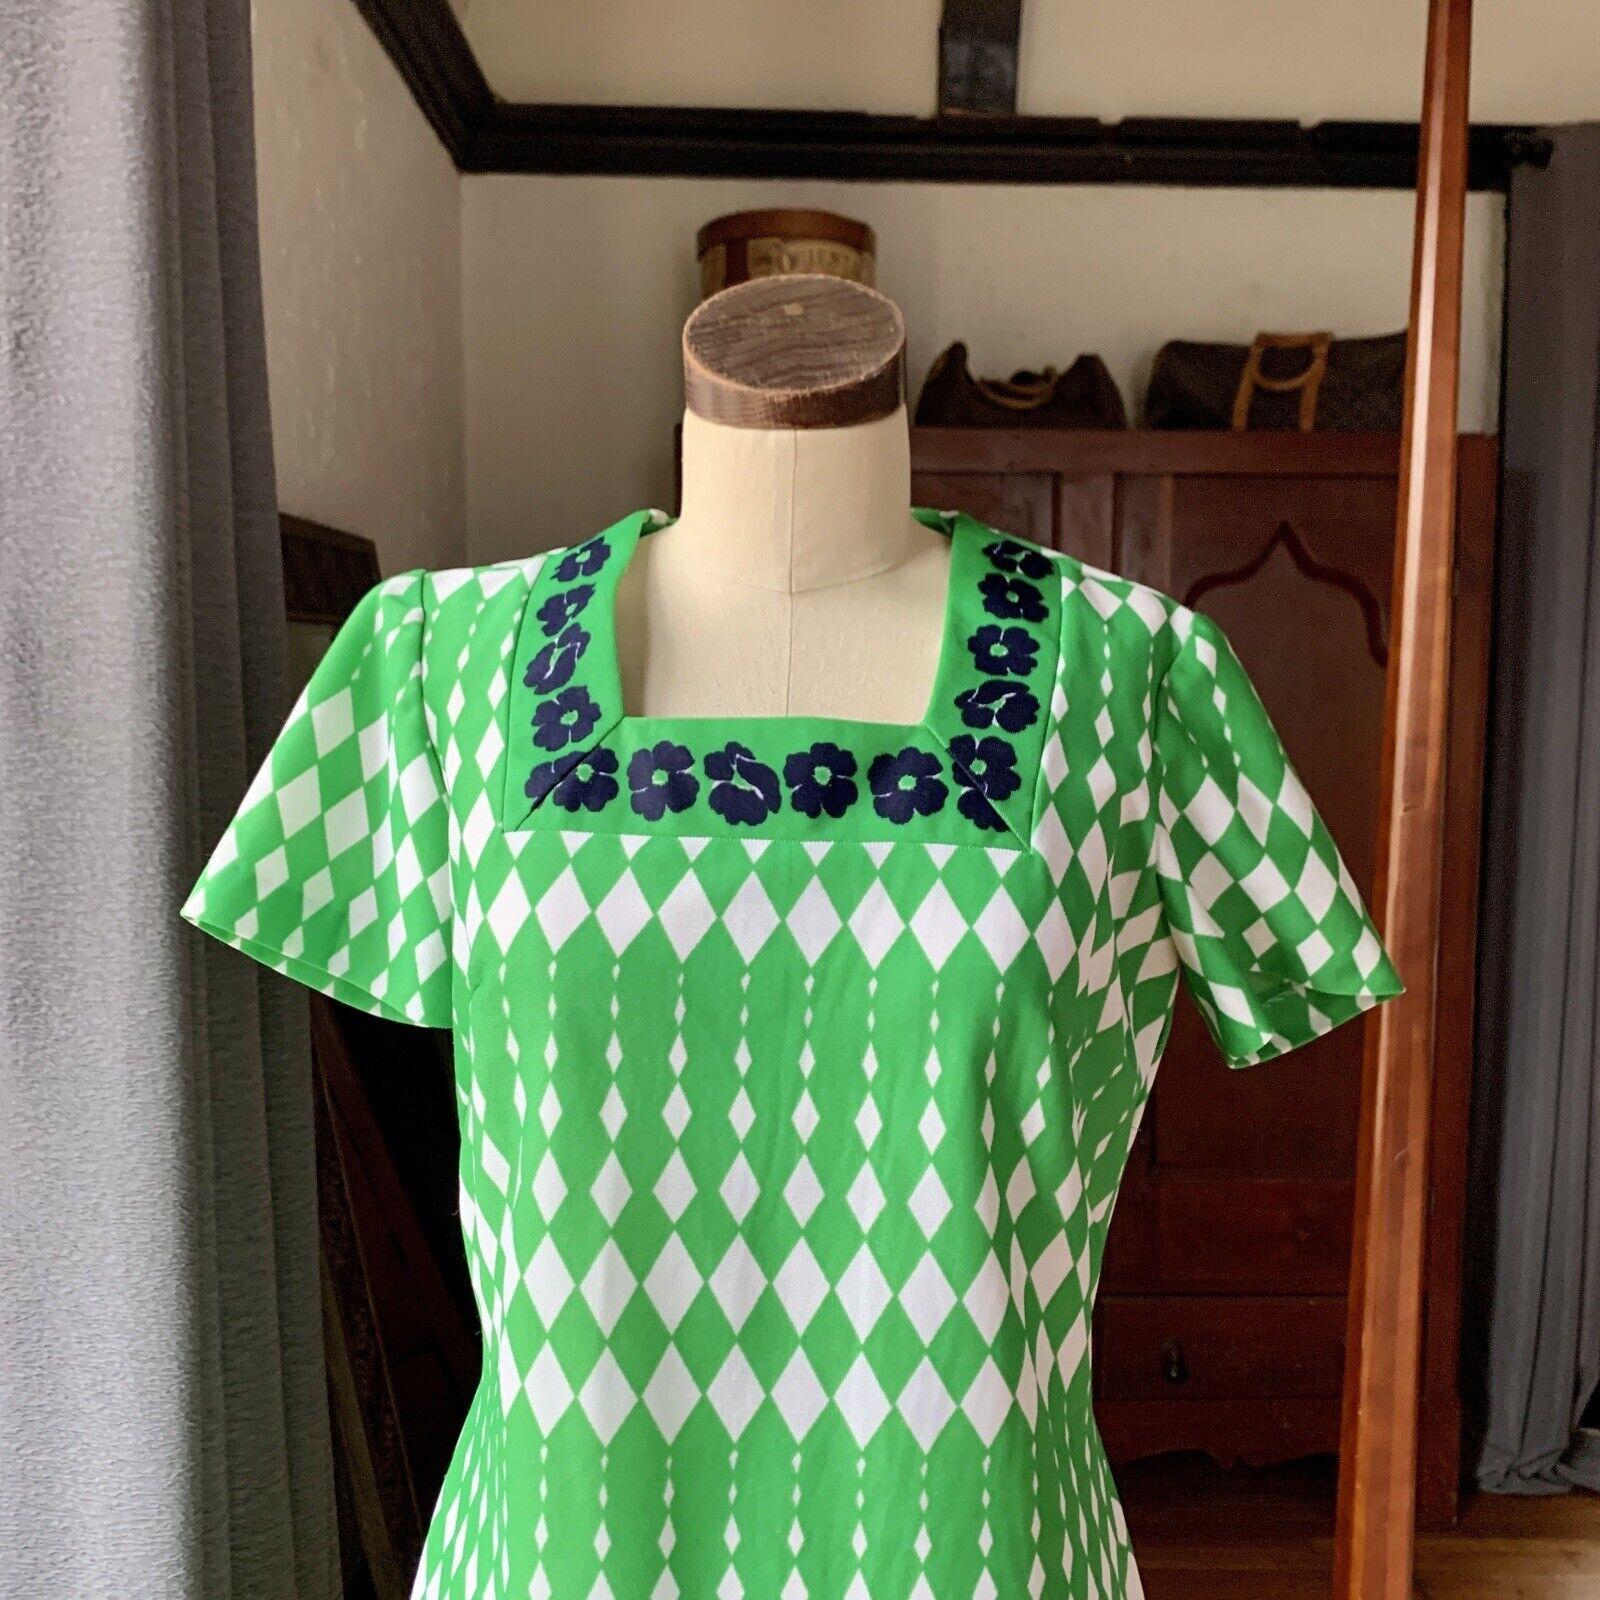 Vintage Mod Green Dress, Diamond and Floral Print, Polyester, Metal Zipper on Back, Darted, Short Sleeve, Calf Length, Great for Spring !

Mesures à plat :
Poitrine 18